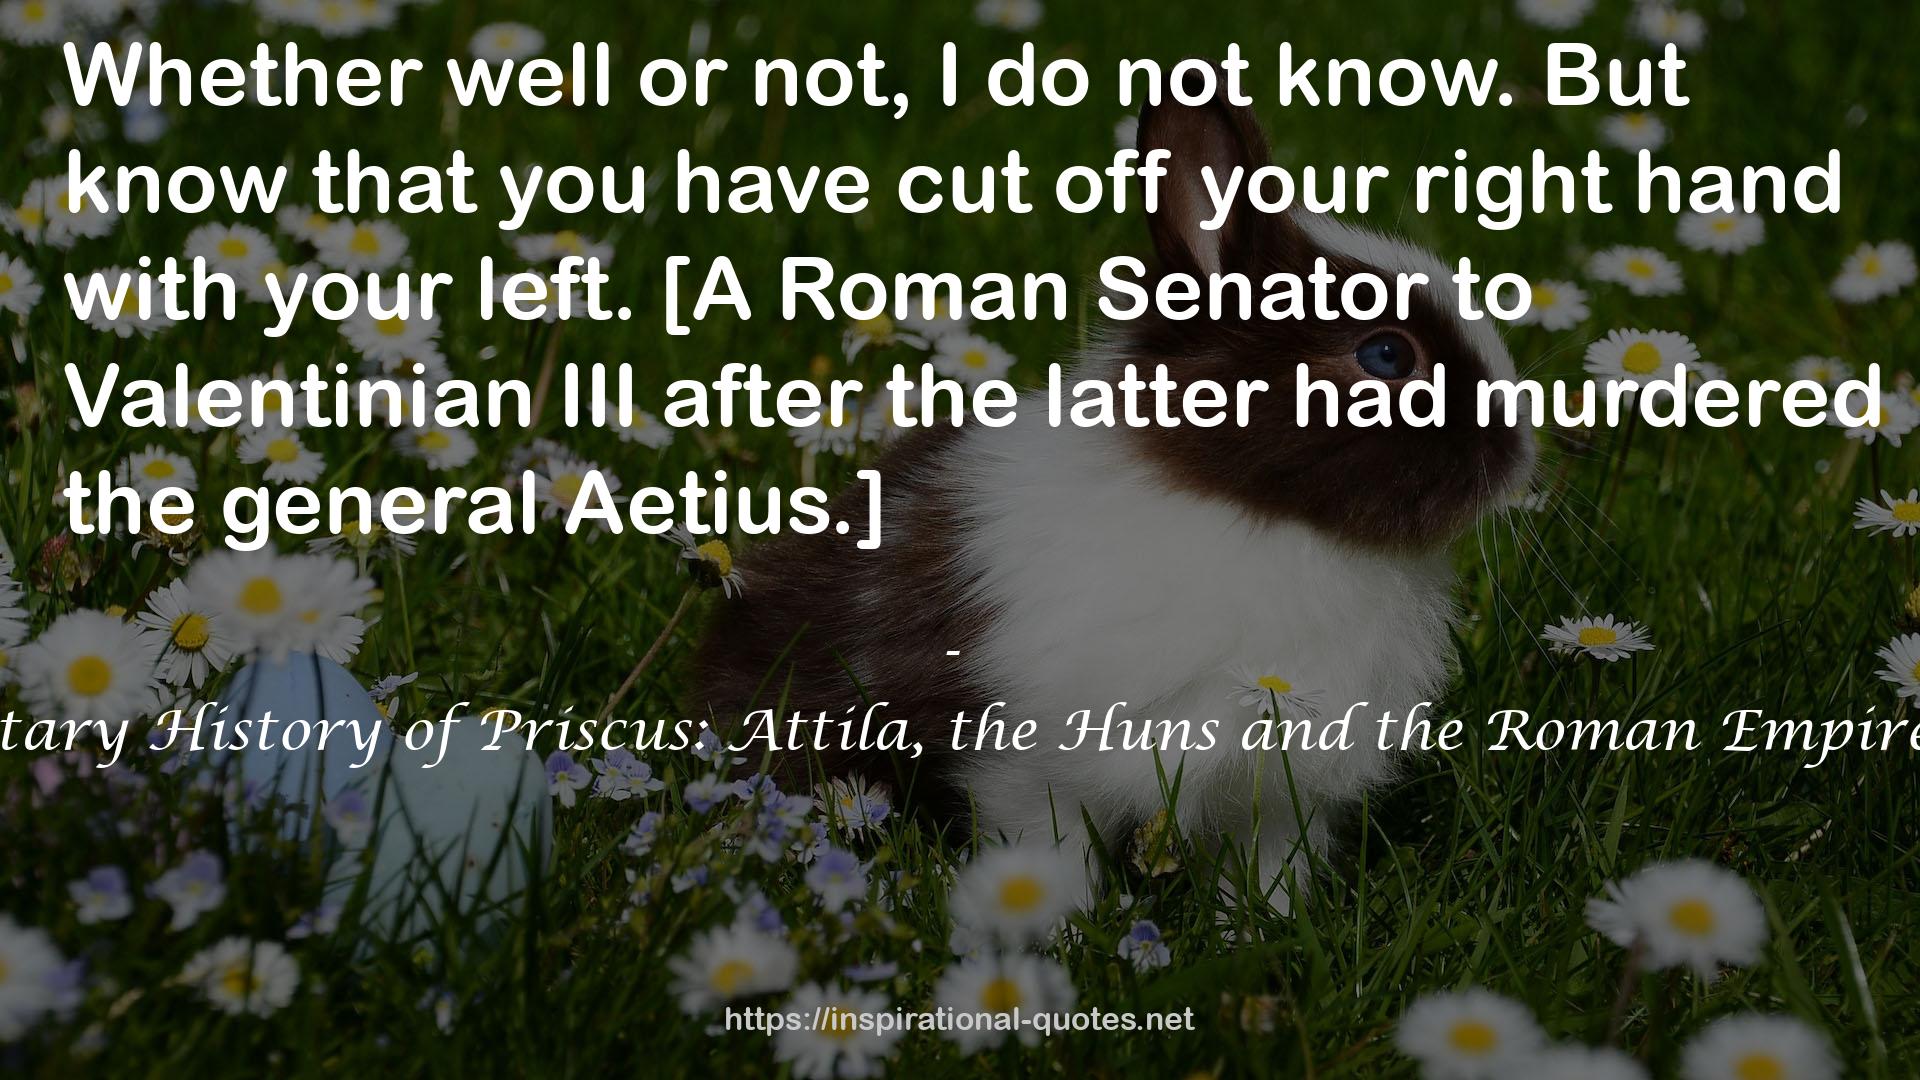 The Fragmentary History of Priscus: Attila, the Huns and the Roman Empire, AD 430-476 QUOTES